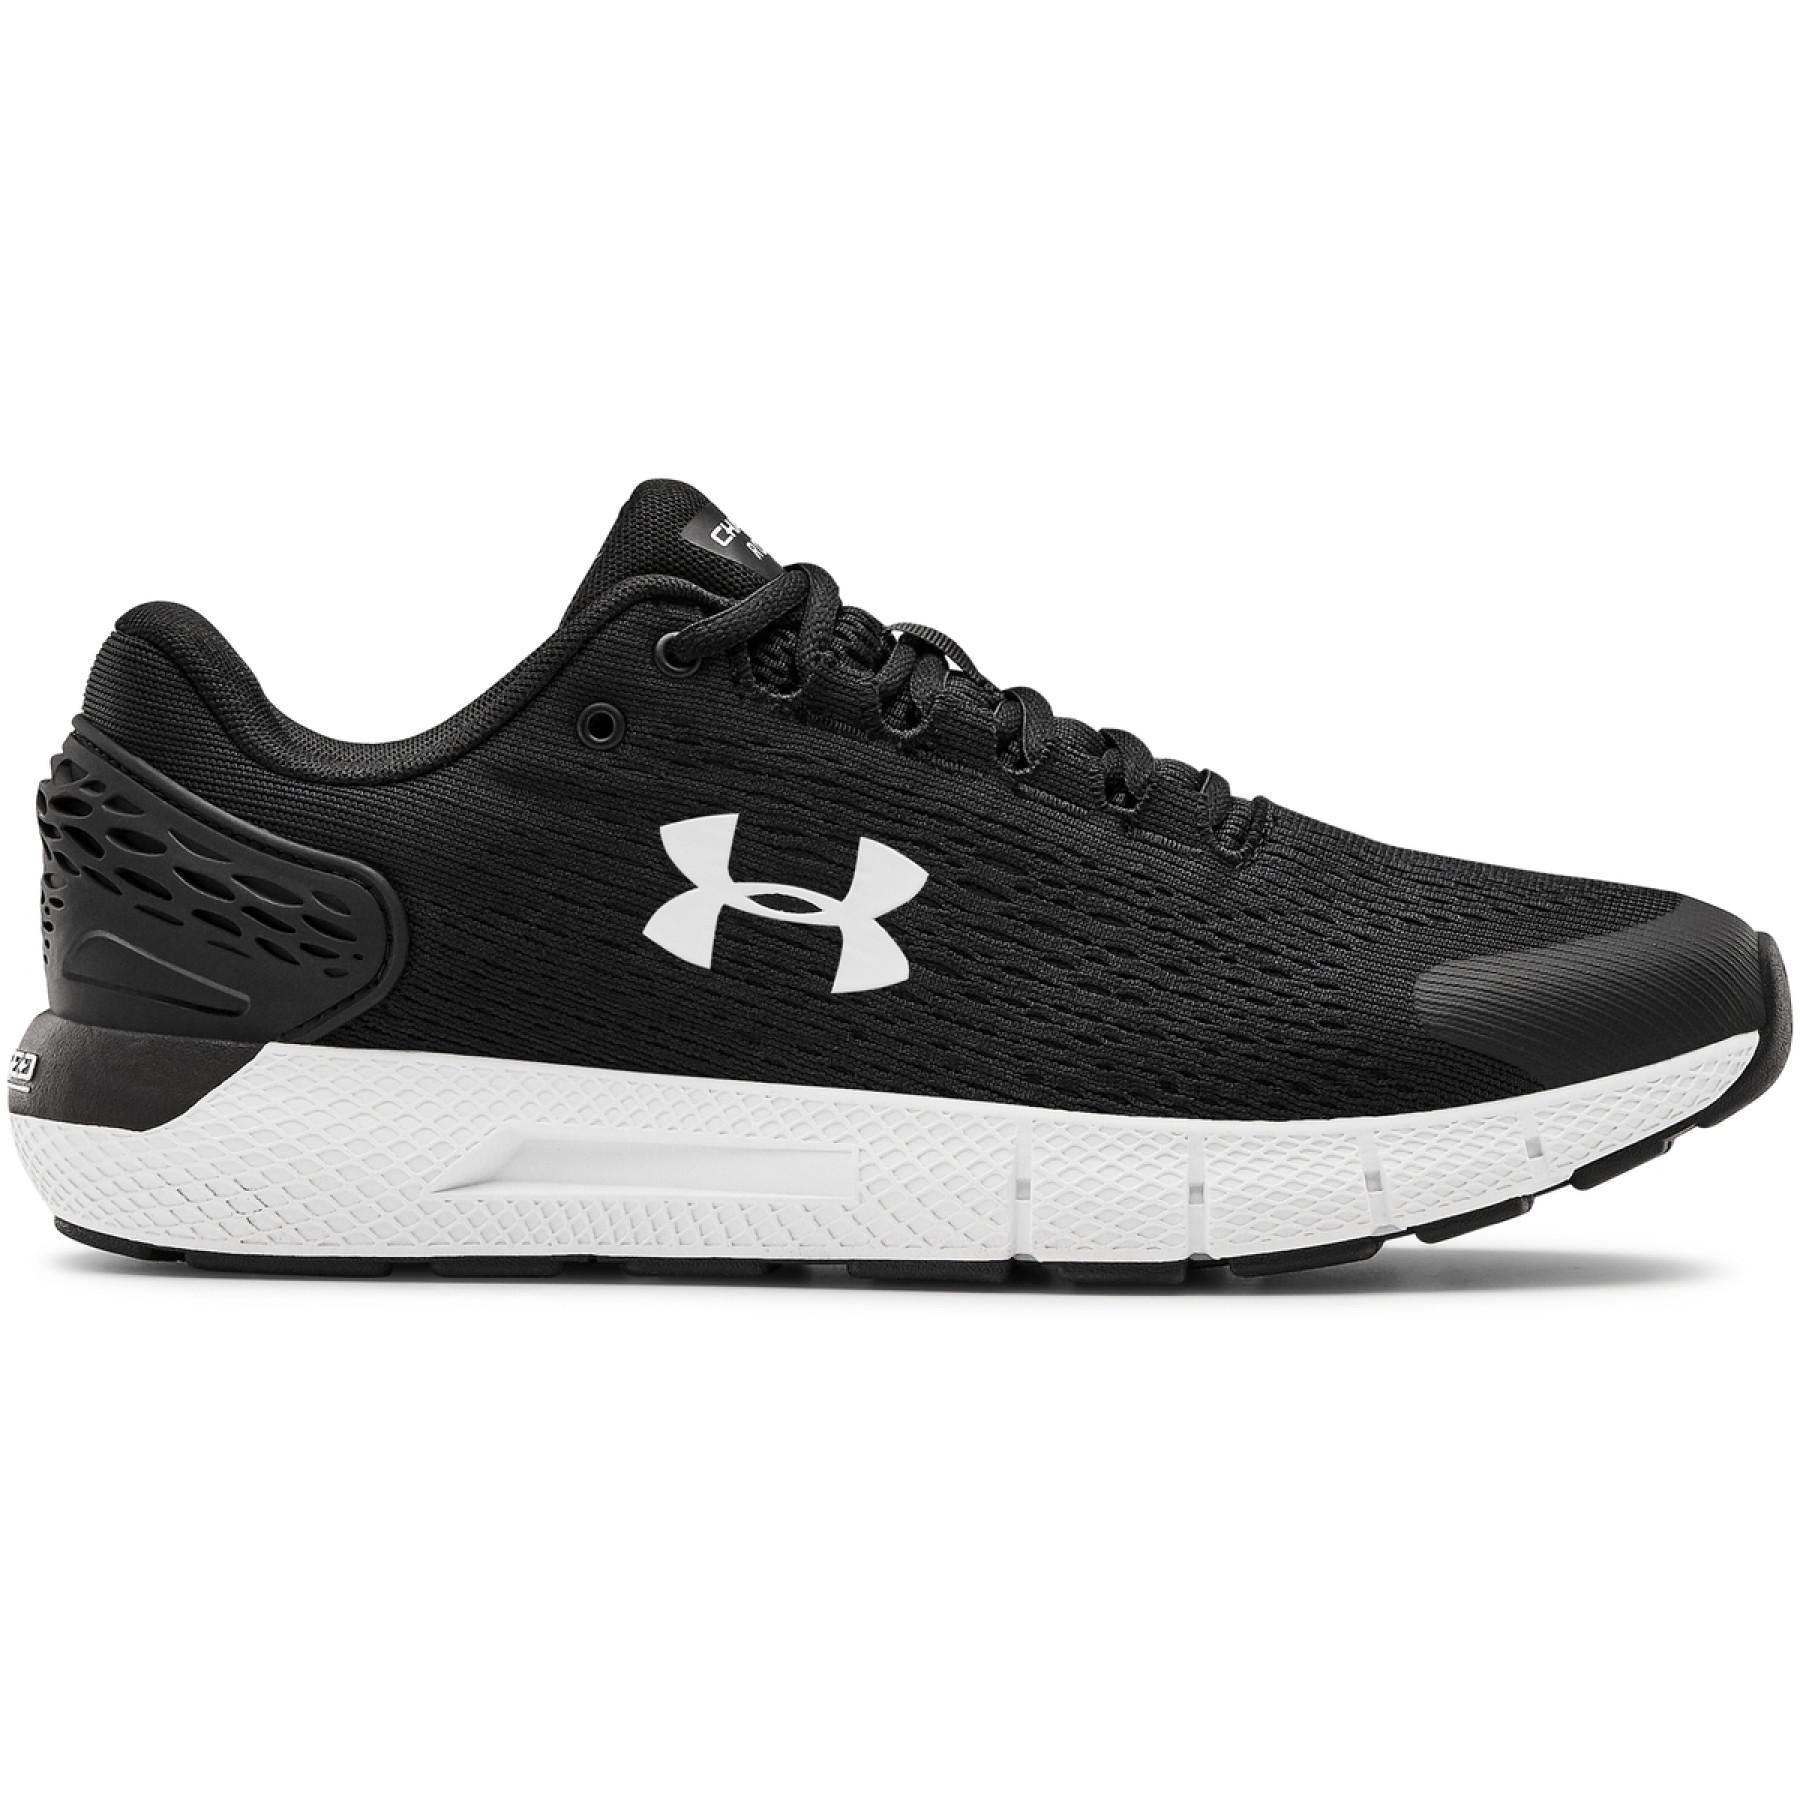 Chaussures de running Under Armour Charged Rogue 2